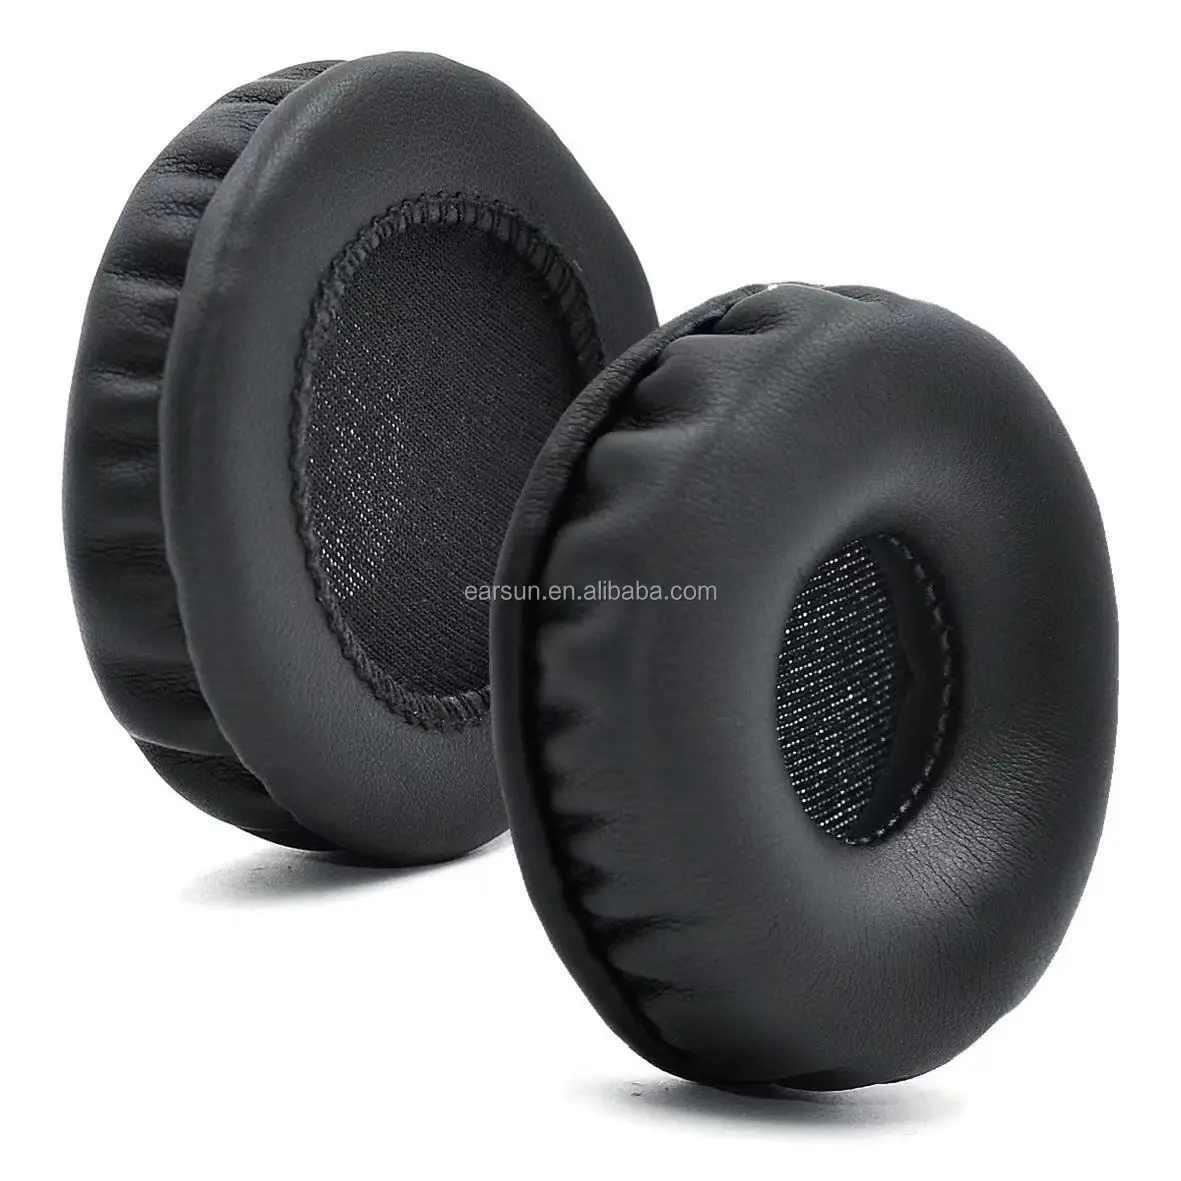 

Free Shipping Replacement Earpads Ear Pads Ear Cushion for Jabra Evolve 20 20se 30 40 65 Headphone Headset, Black